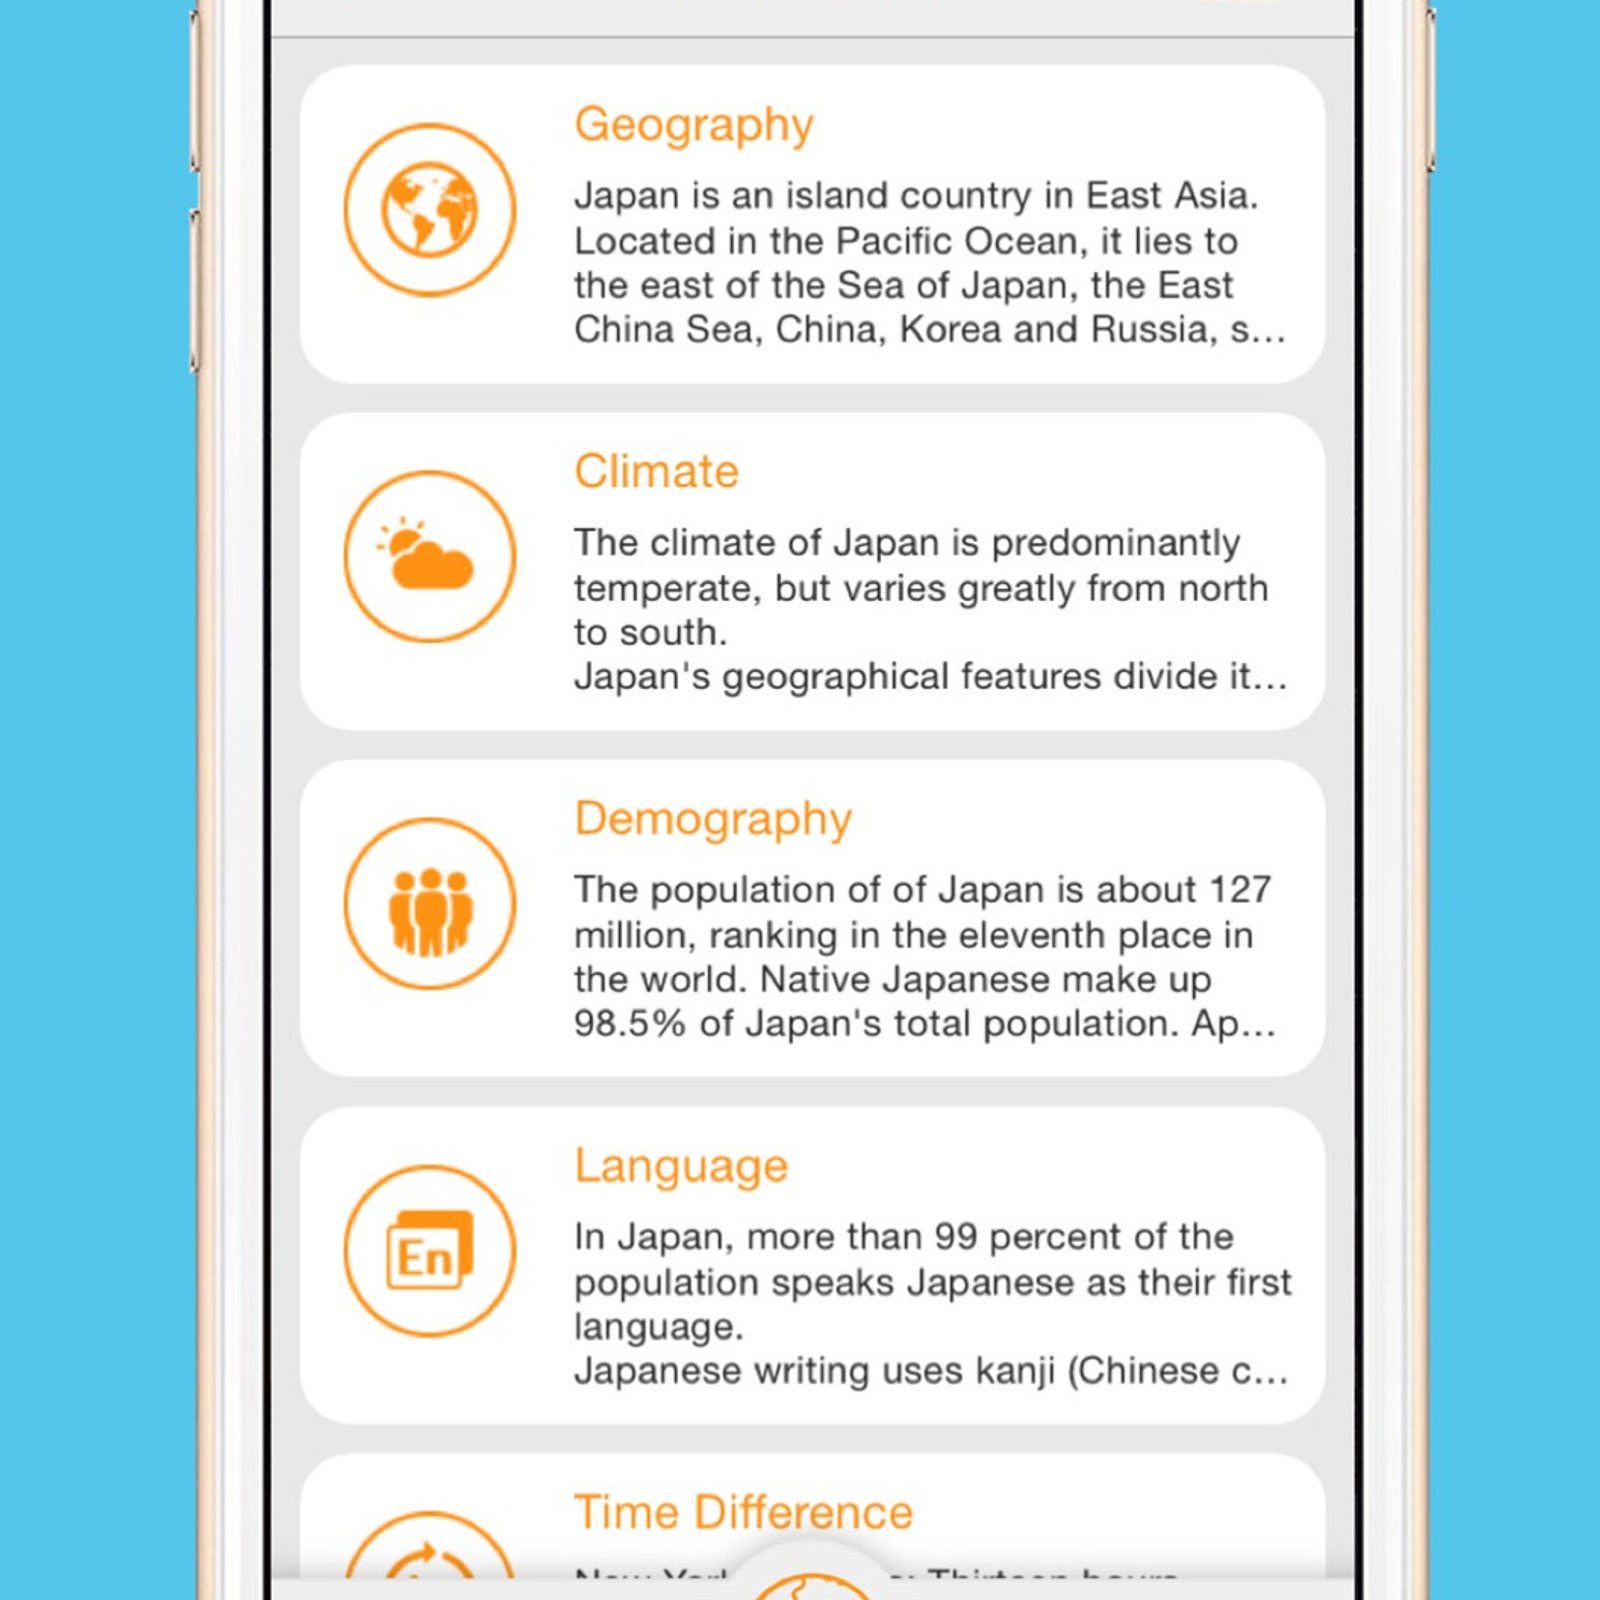 Tourank Smart Mobile Travel Guide on Japan for iPhone ...